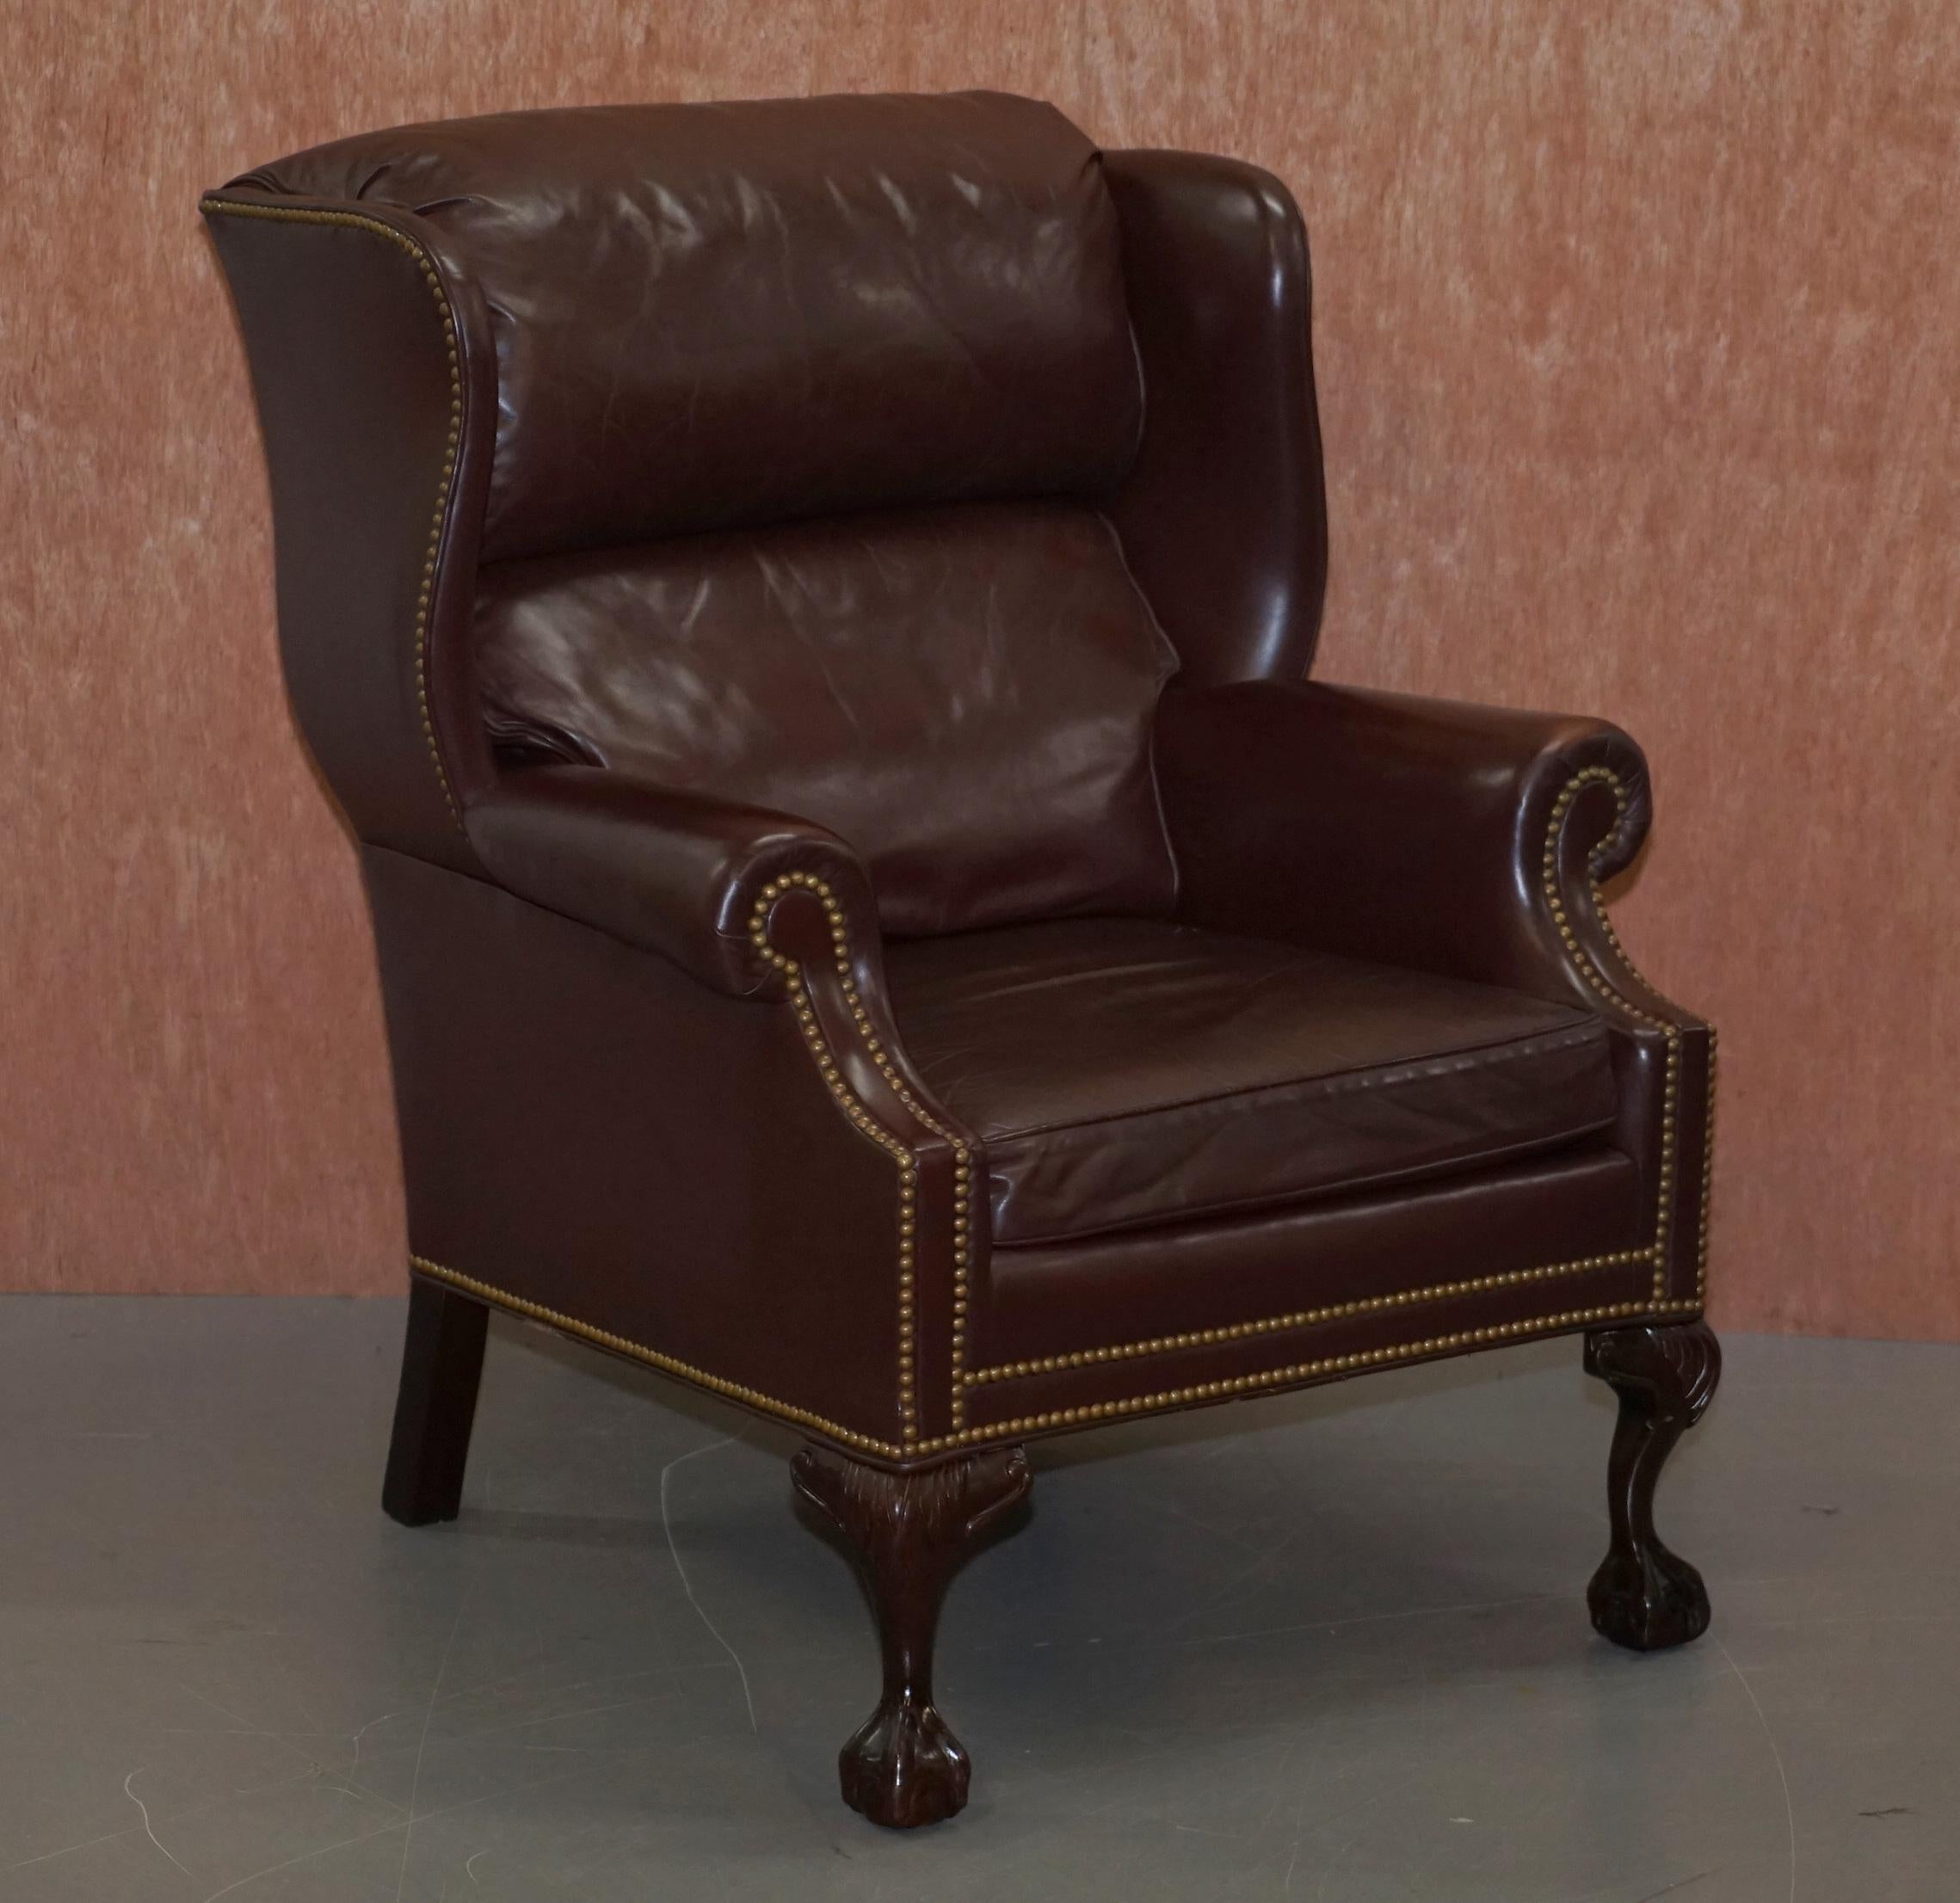 We are delighted to offer for sale this lovely pair of original Hancock & Moore wingback armchairs with claw & ball feet

A very good looking and seriously comfortable pair of armchairs, made in the Chippendale style with elegant hand carved Claw